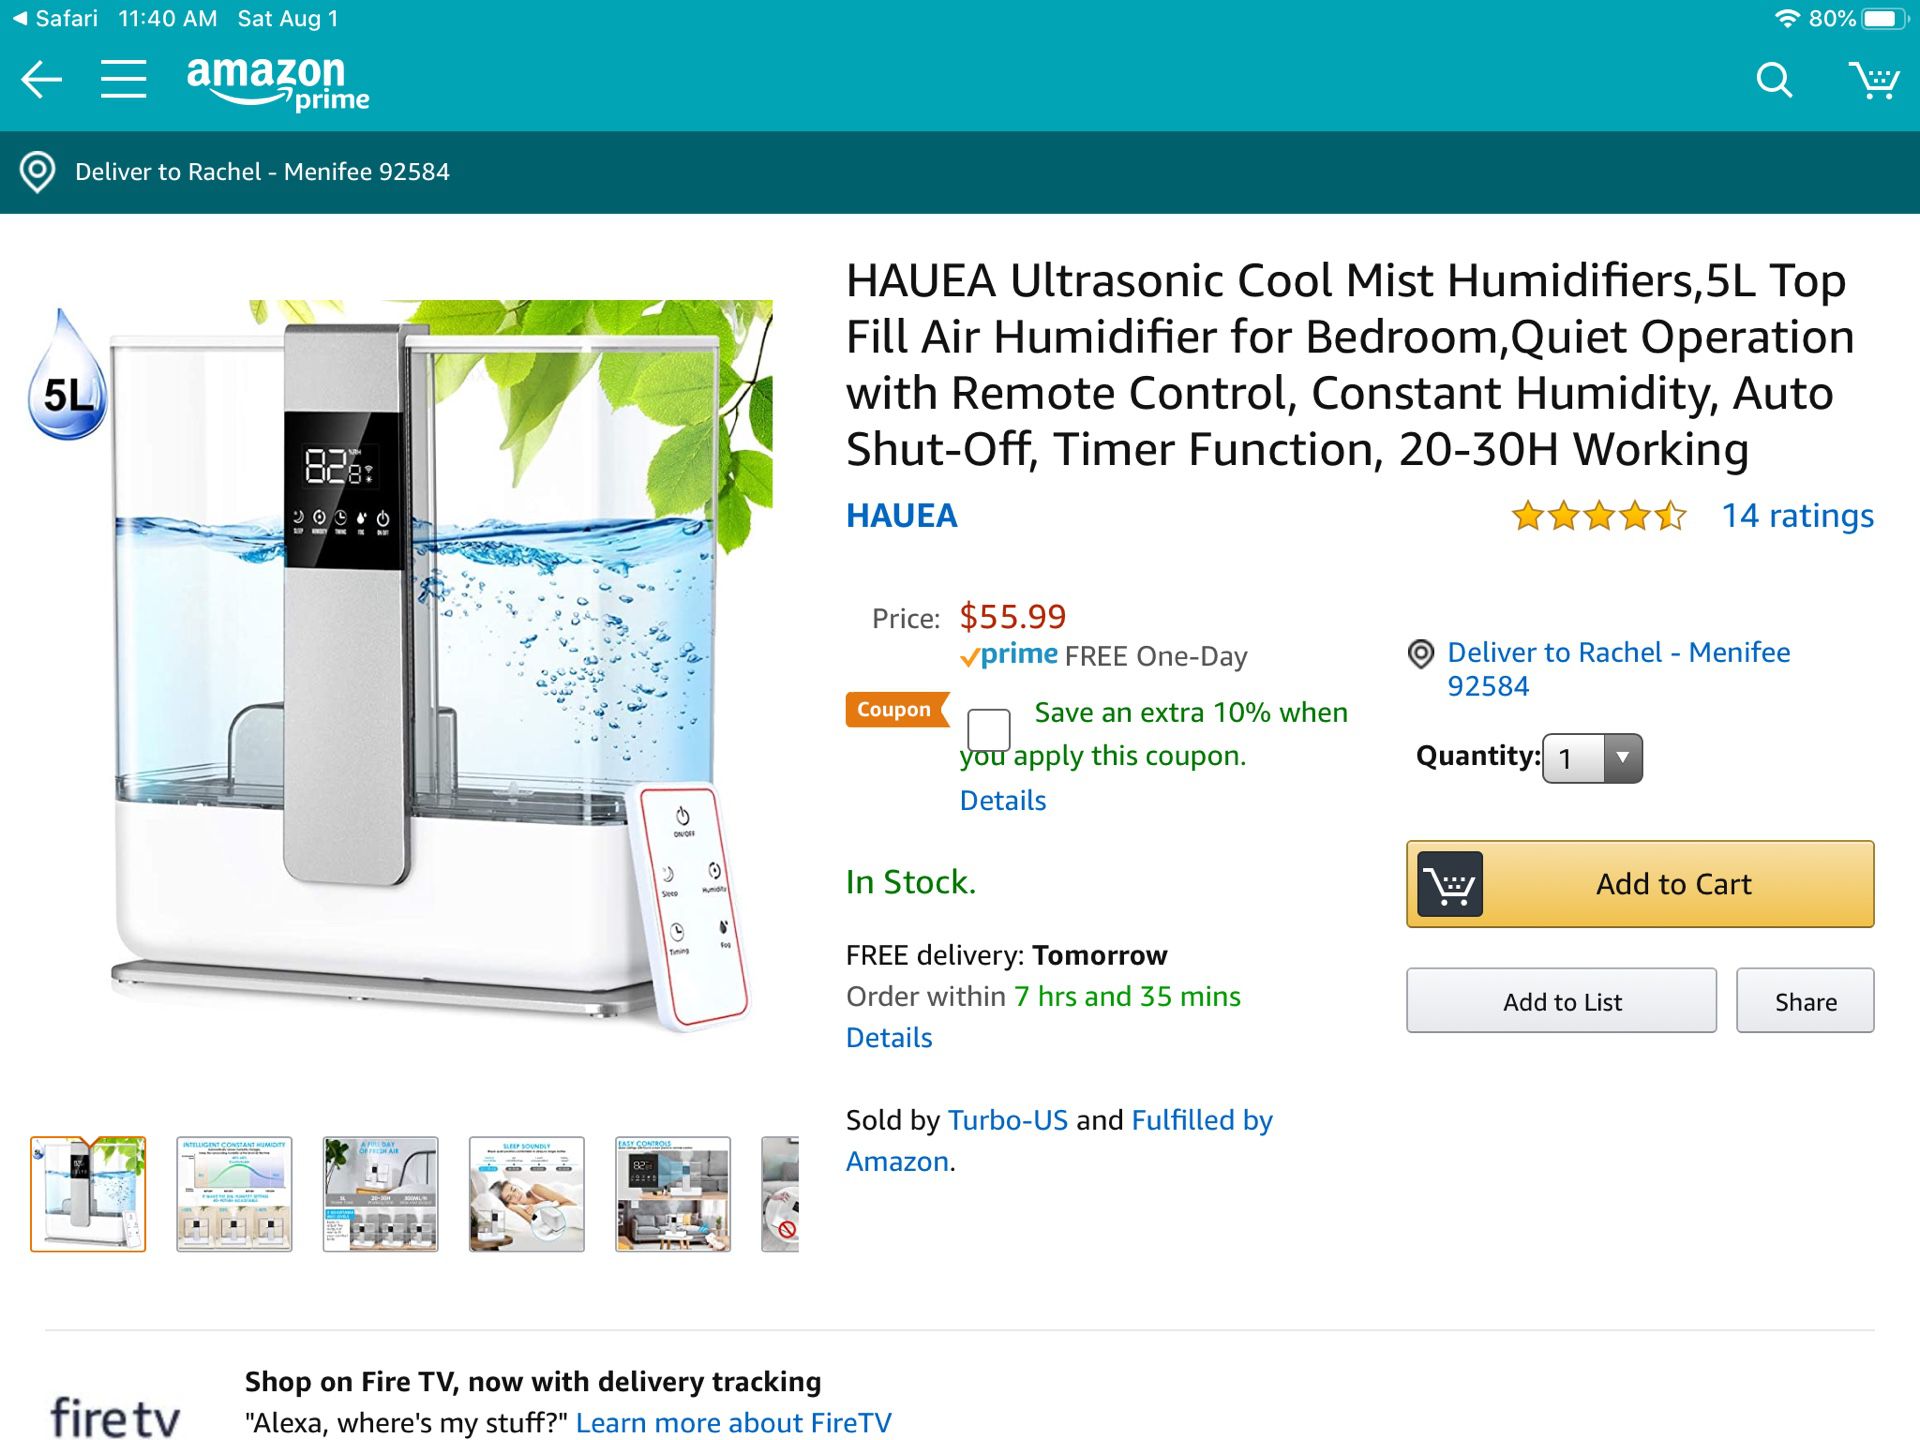 Cool mist humidifier with remote control